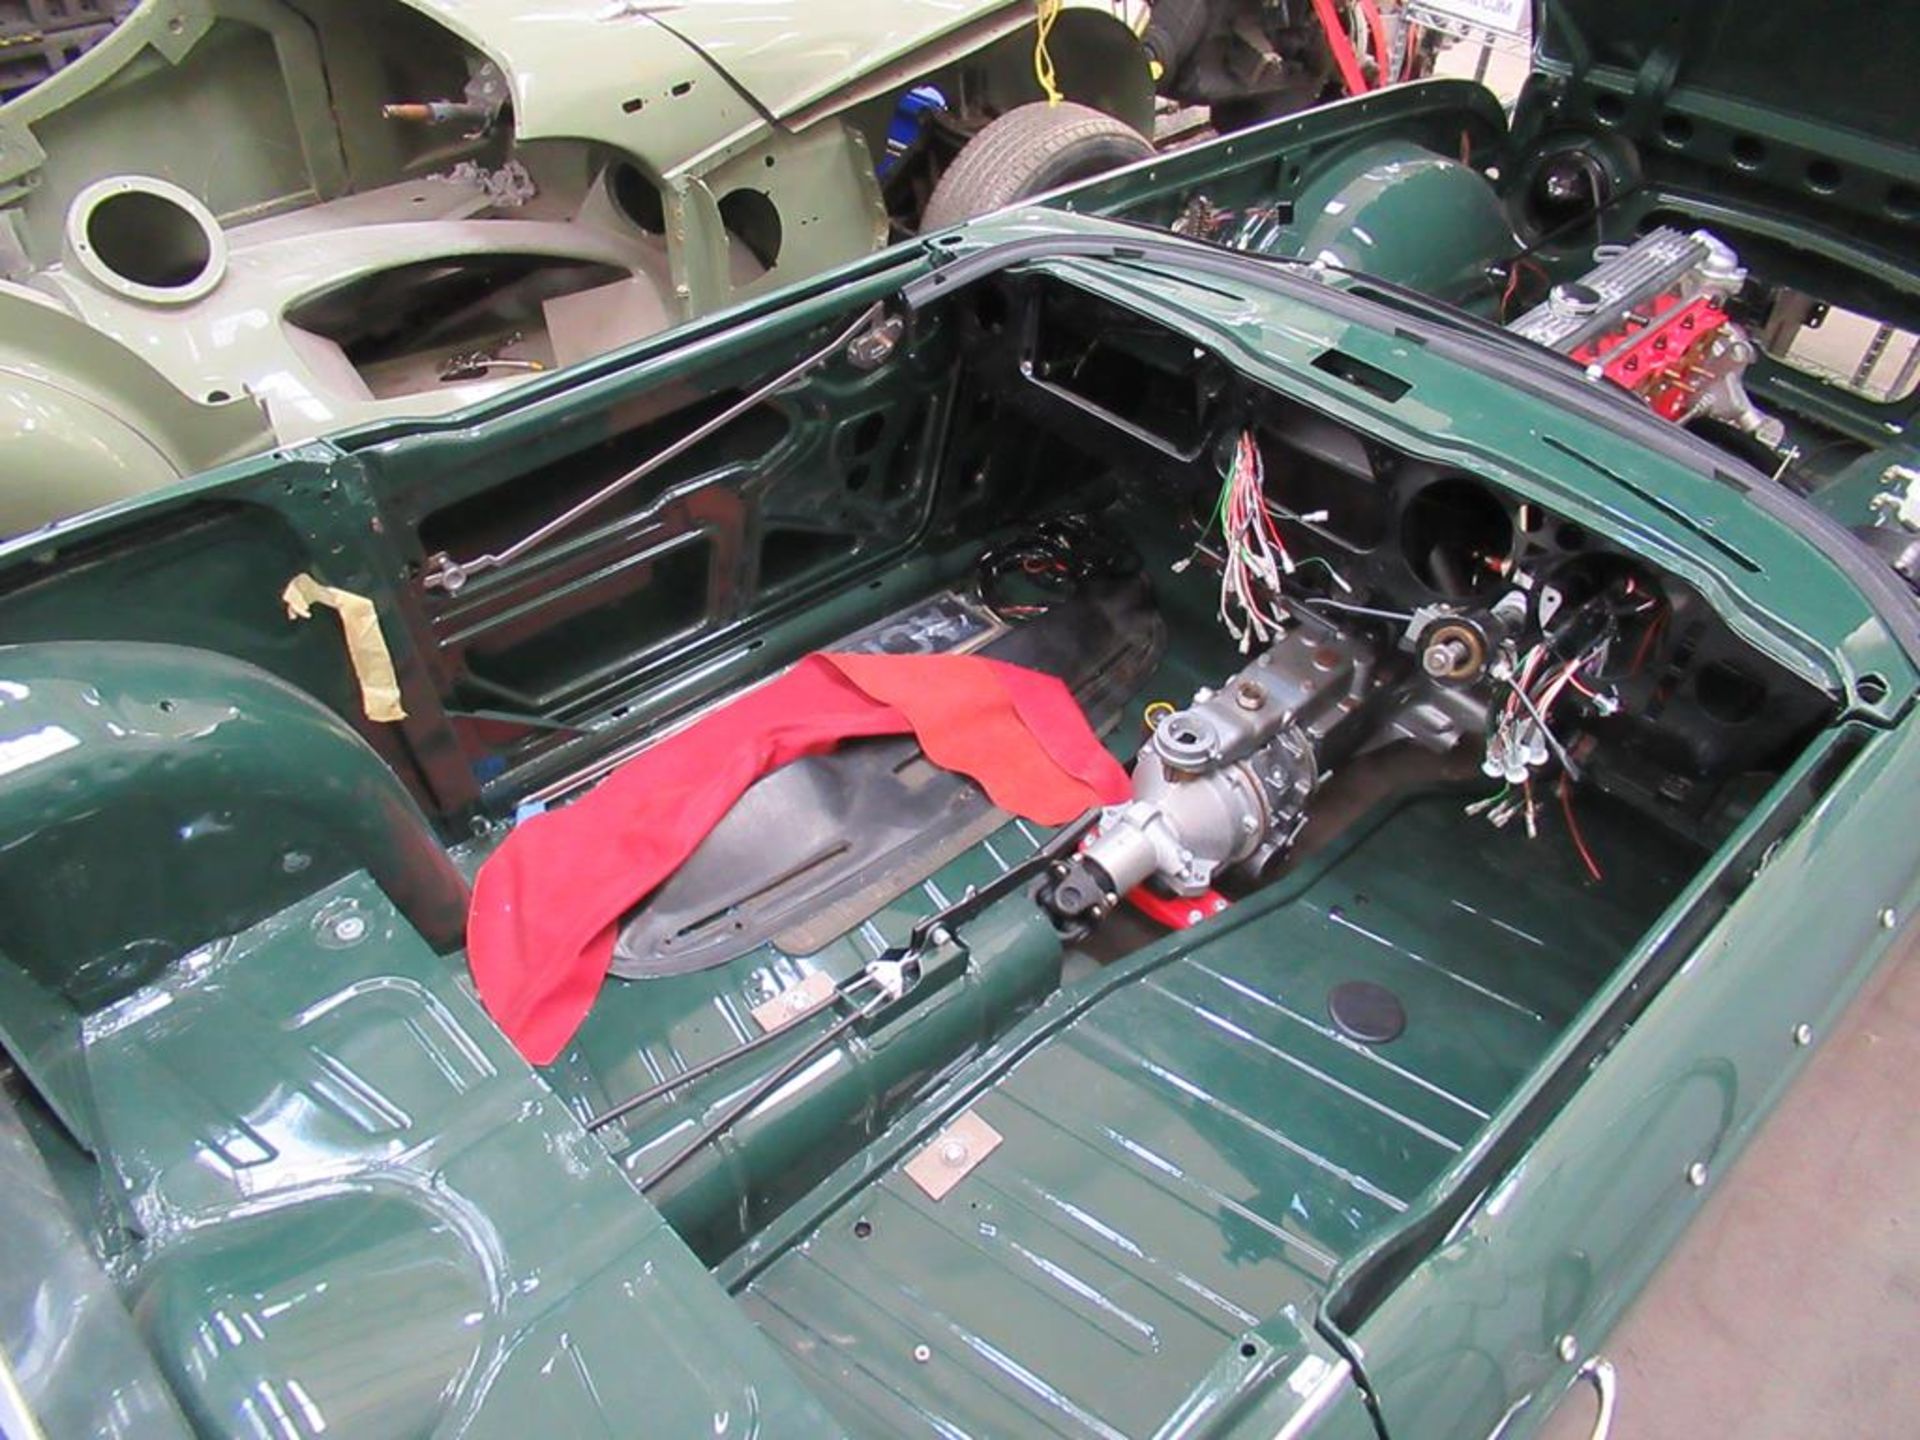 Partly restored 1968 Triumph TR5 PI fitted with Steel Engine - Image 8 of 44